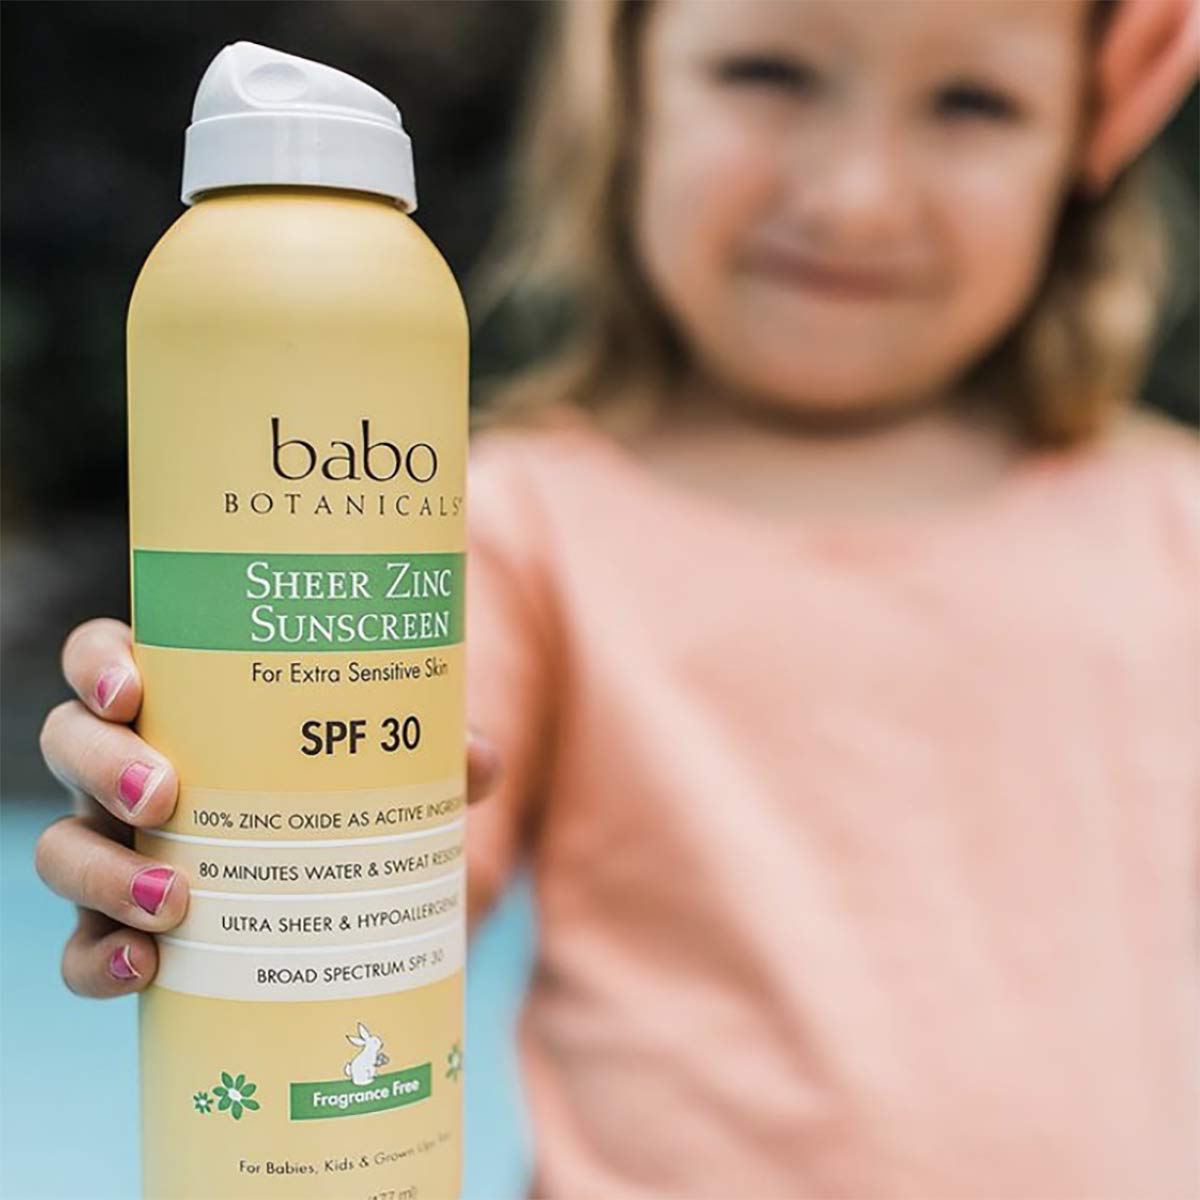 Babo Botanicals Sheer Zinc Continuous Spray Sunscreen SPF 30 with 100% Mineral Active, Non-Nano, Water-Resistant, Reef-Friendly, Fragrance-Free, Vegan, for Babies, Kids or Sensitive Skin - 6 oz.